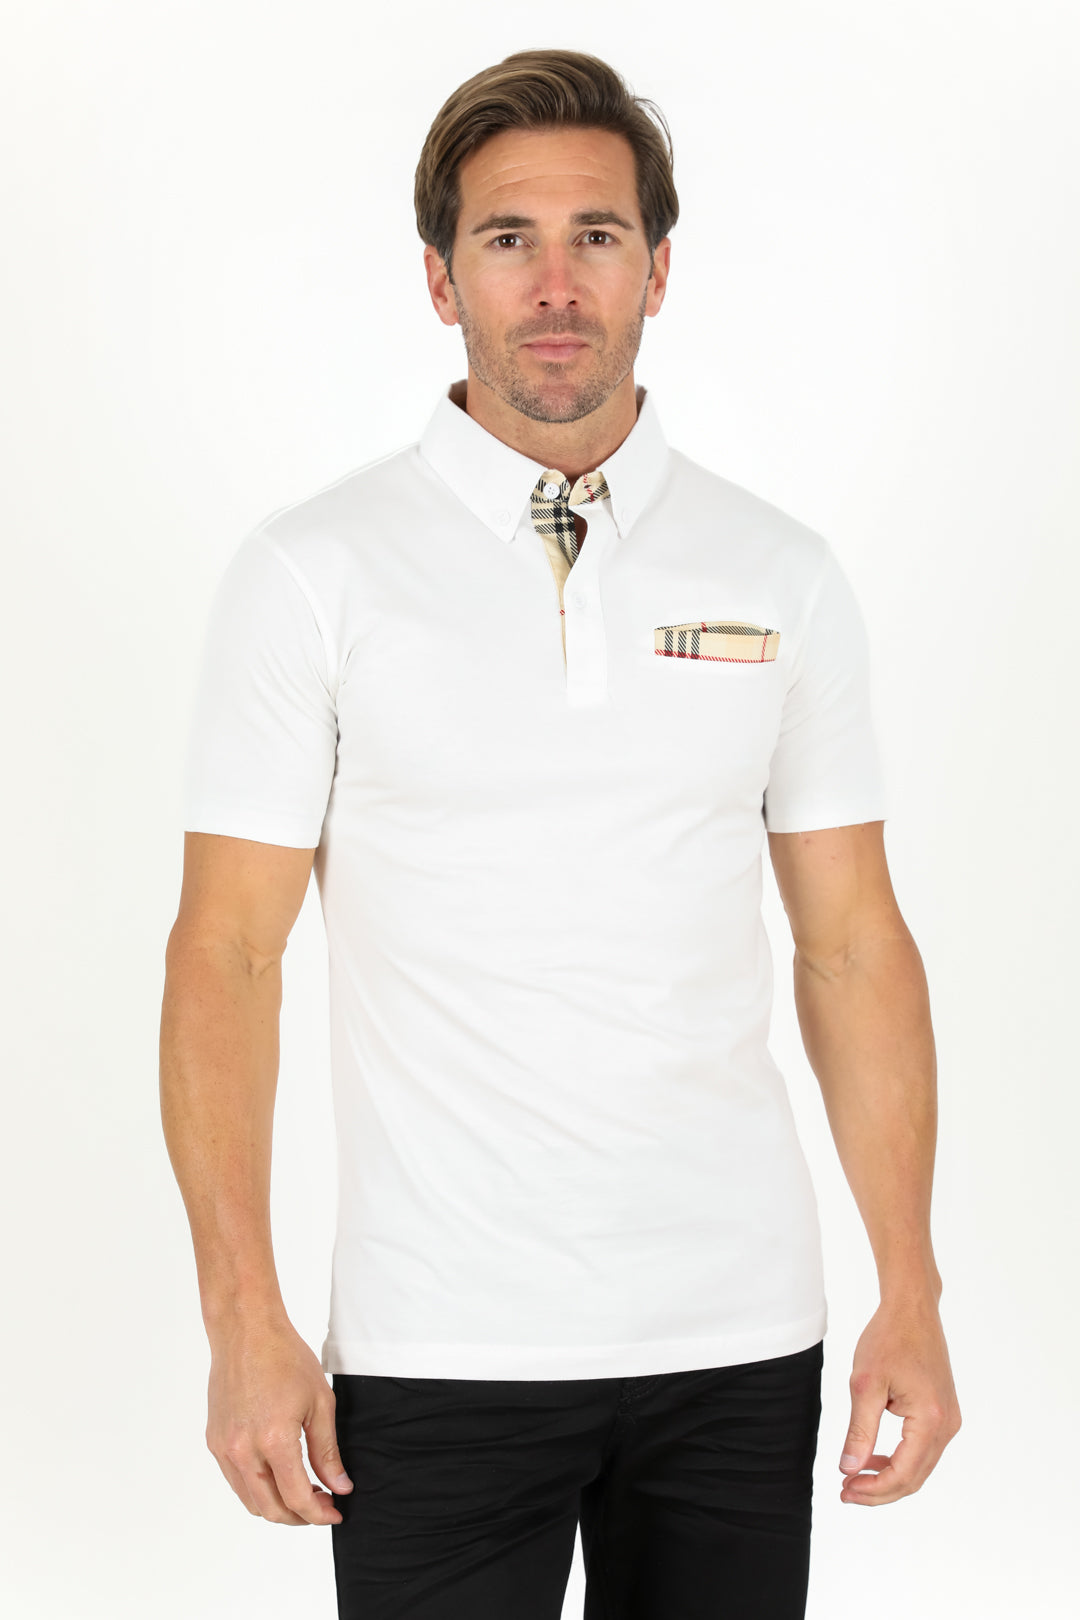 Cotton Knit Polo with Chest Pocket - White